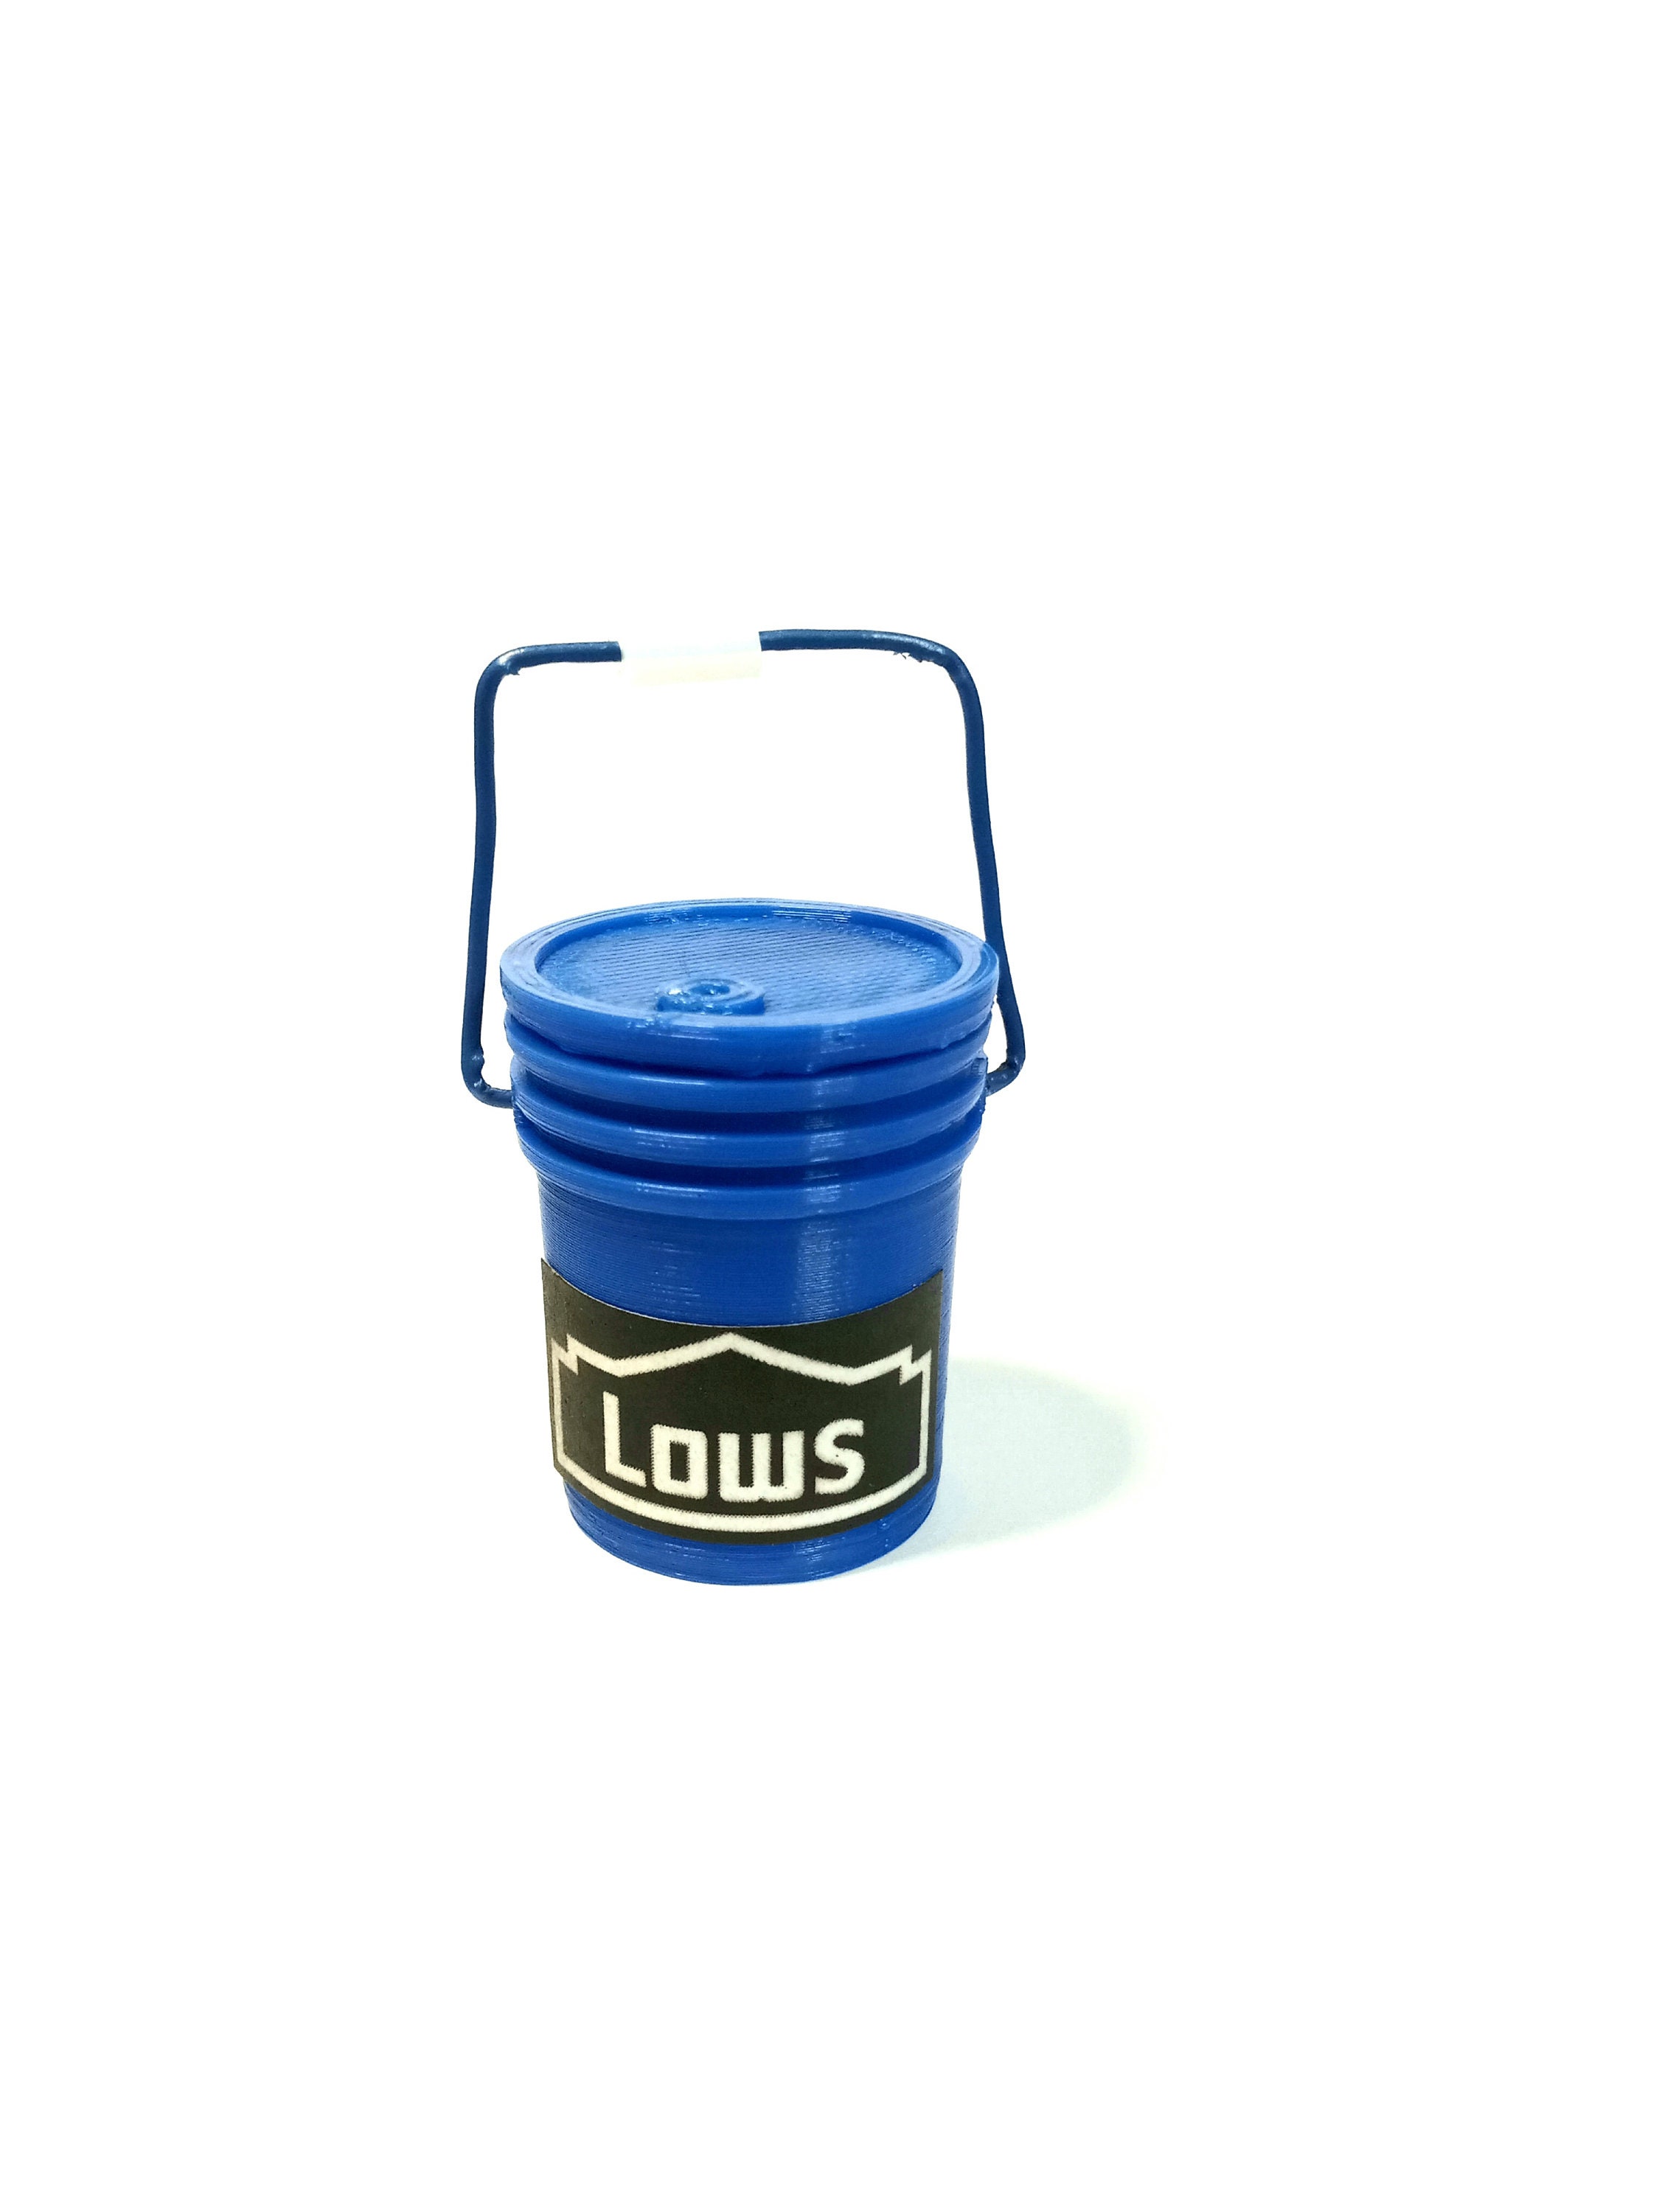 Best 5-Gallon Bucket Gadgets and Accessories